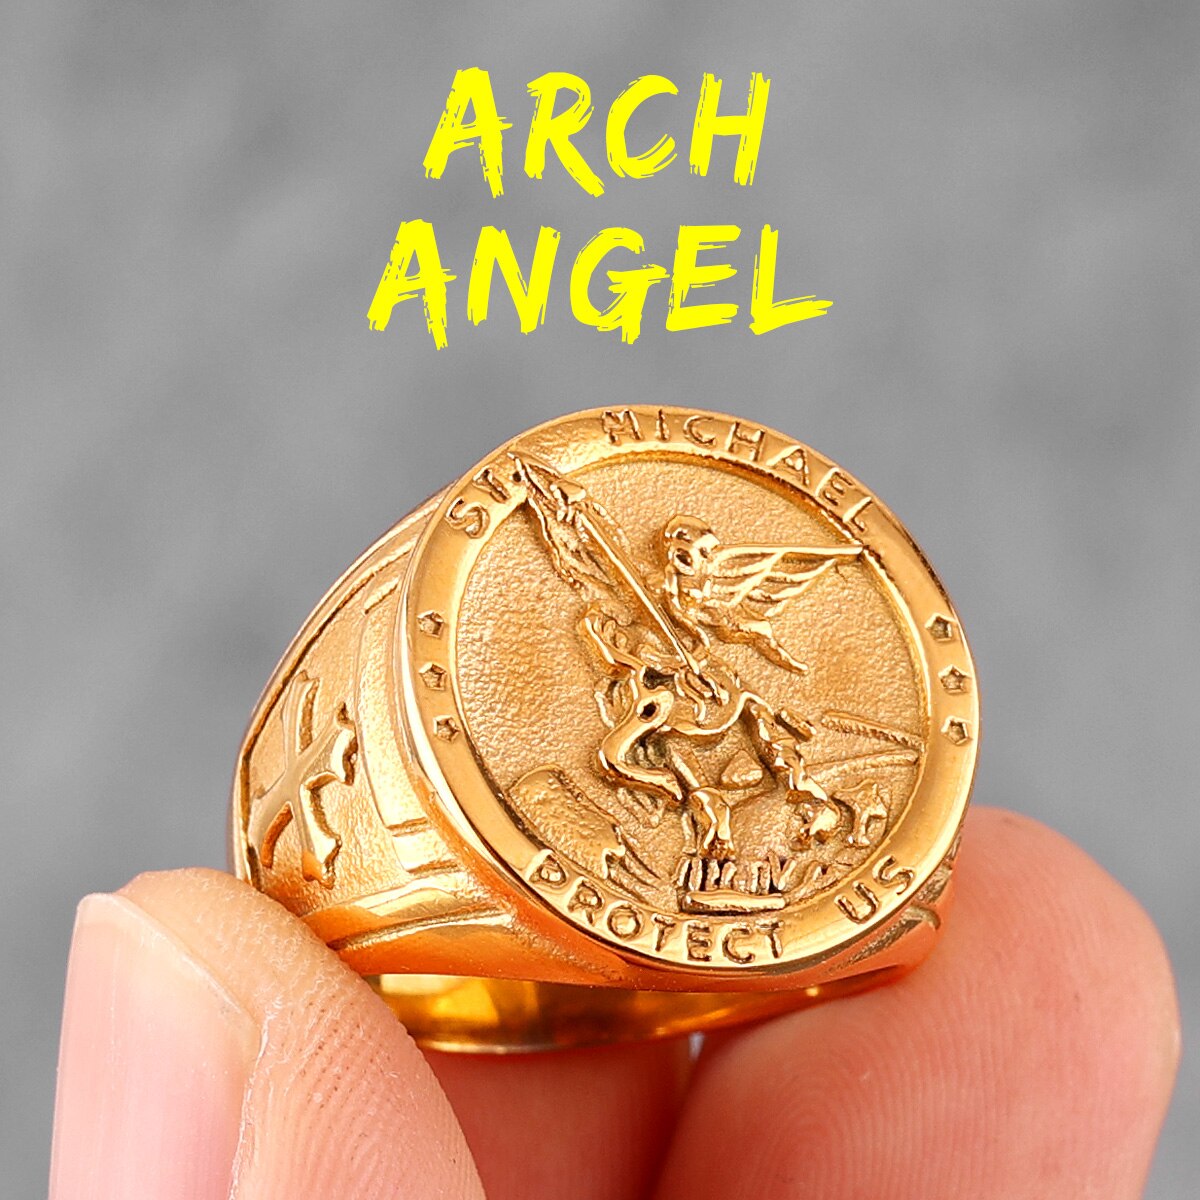 Archangel Saint Michael Exorcism Stainless Steel Mens Rings Punk Amulet for Male Boyfriend Jewelry Creativity Gift R704-Gold A